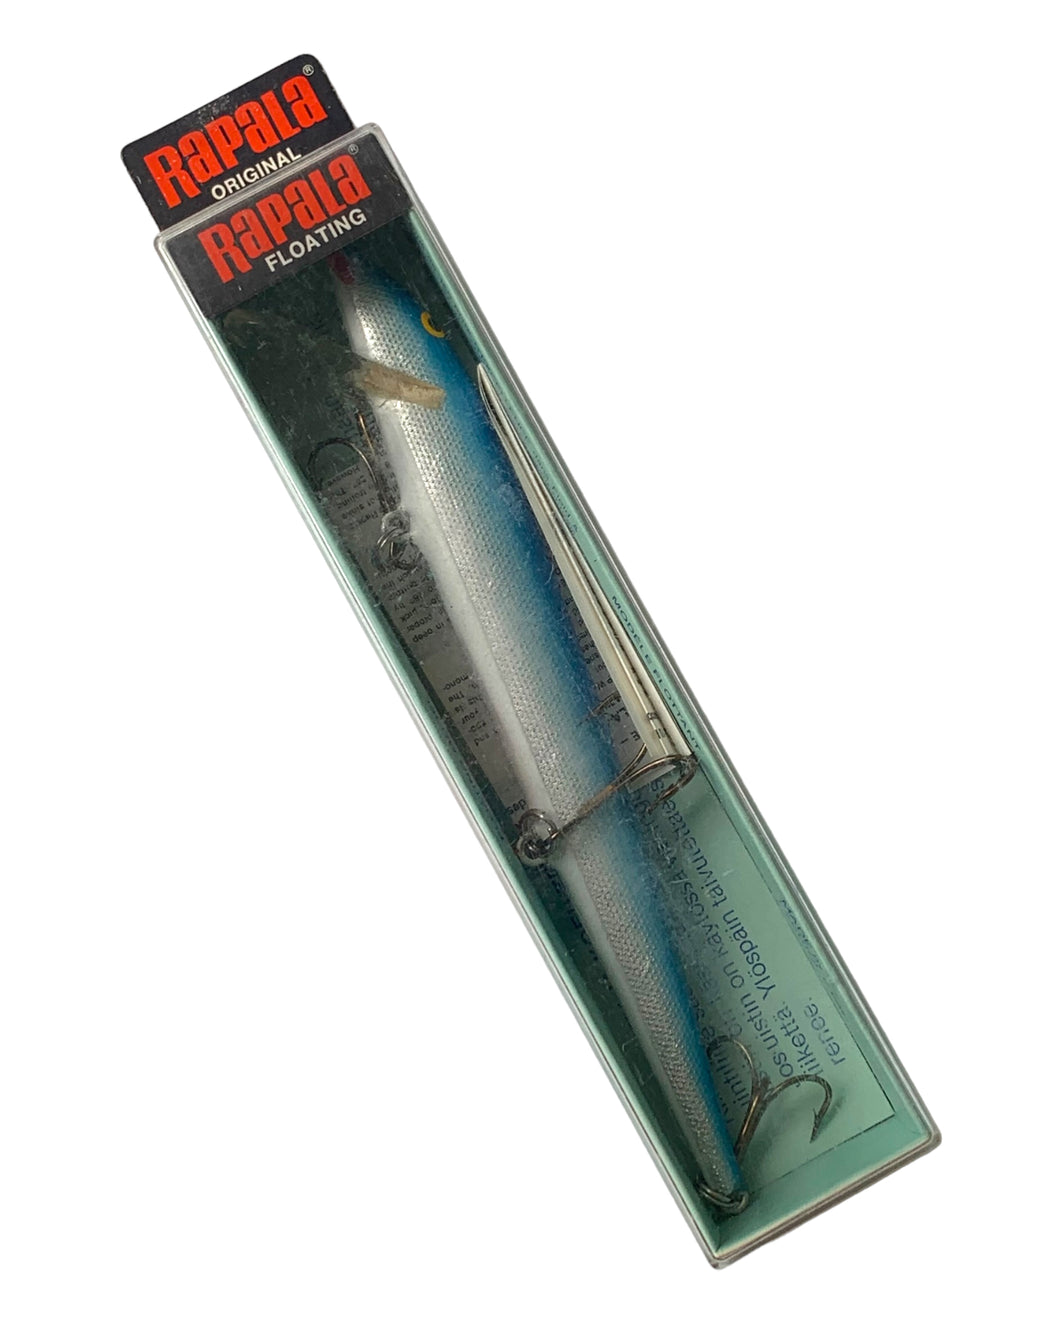 Boxed View of  RAPALA ORIGINAL FLOATING 18 (F-18) Fishing Lure in Blue. Finland Made. Only at Toad Tackle.